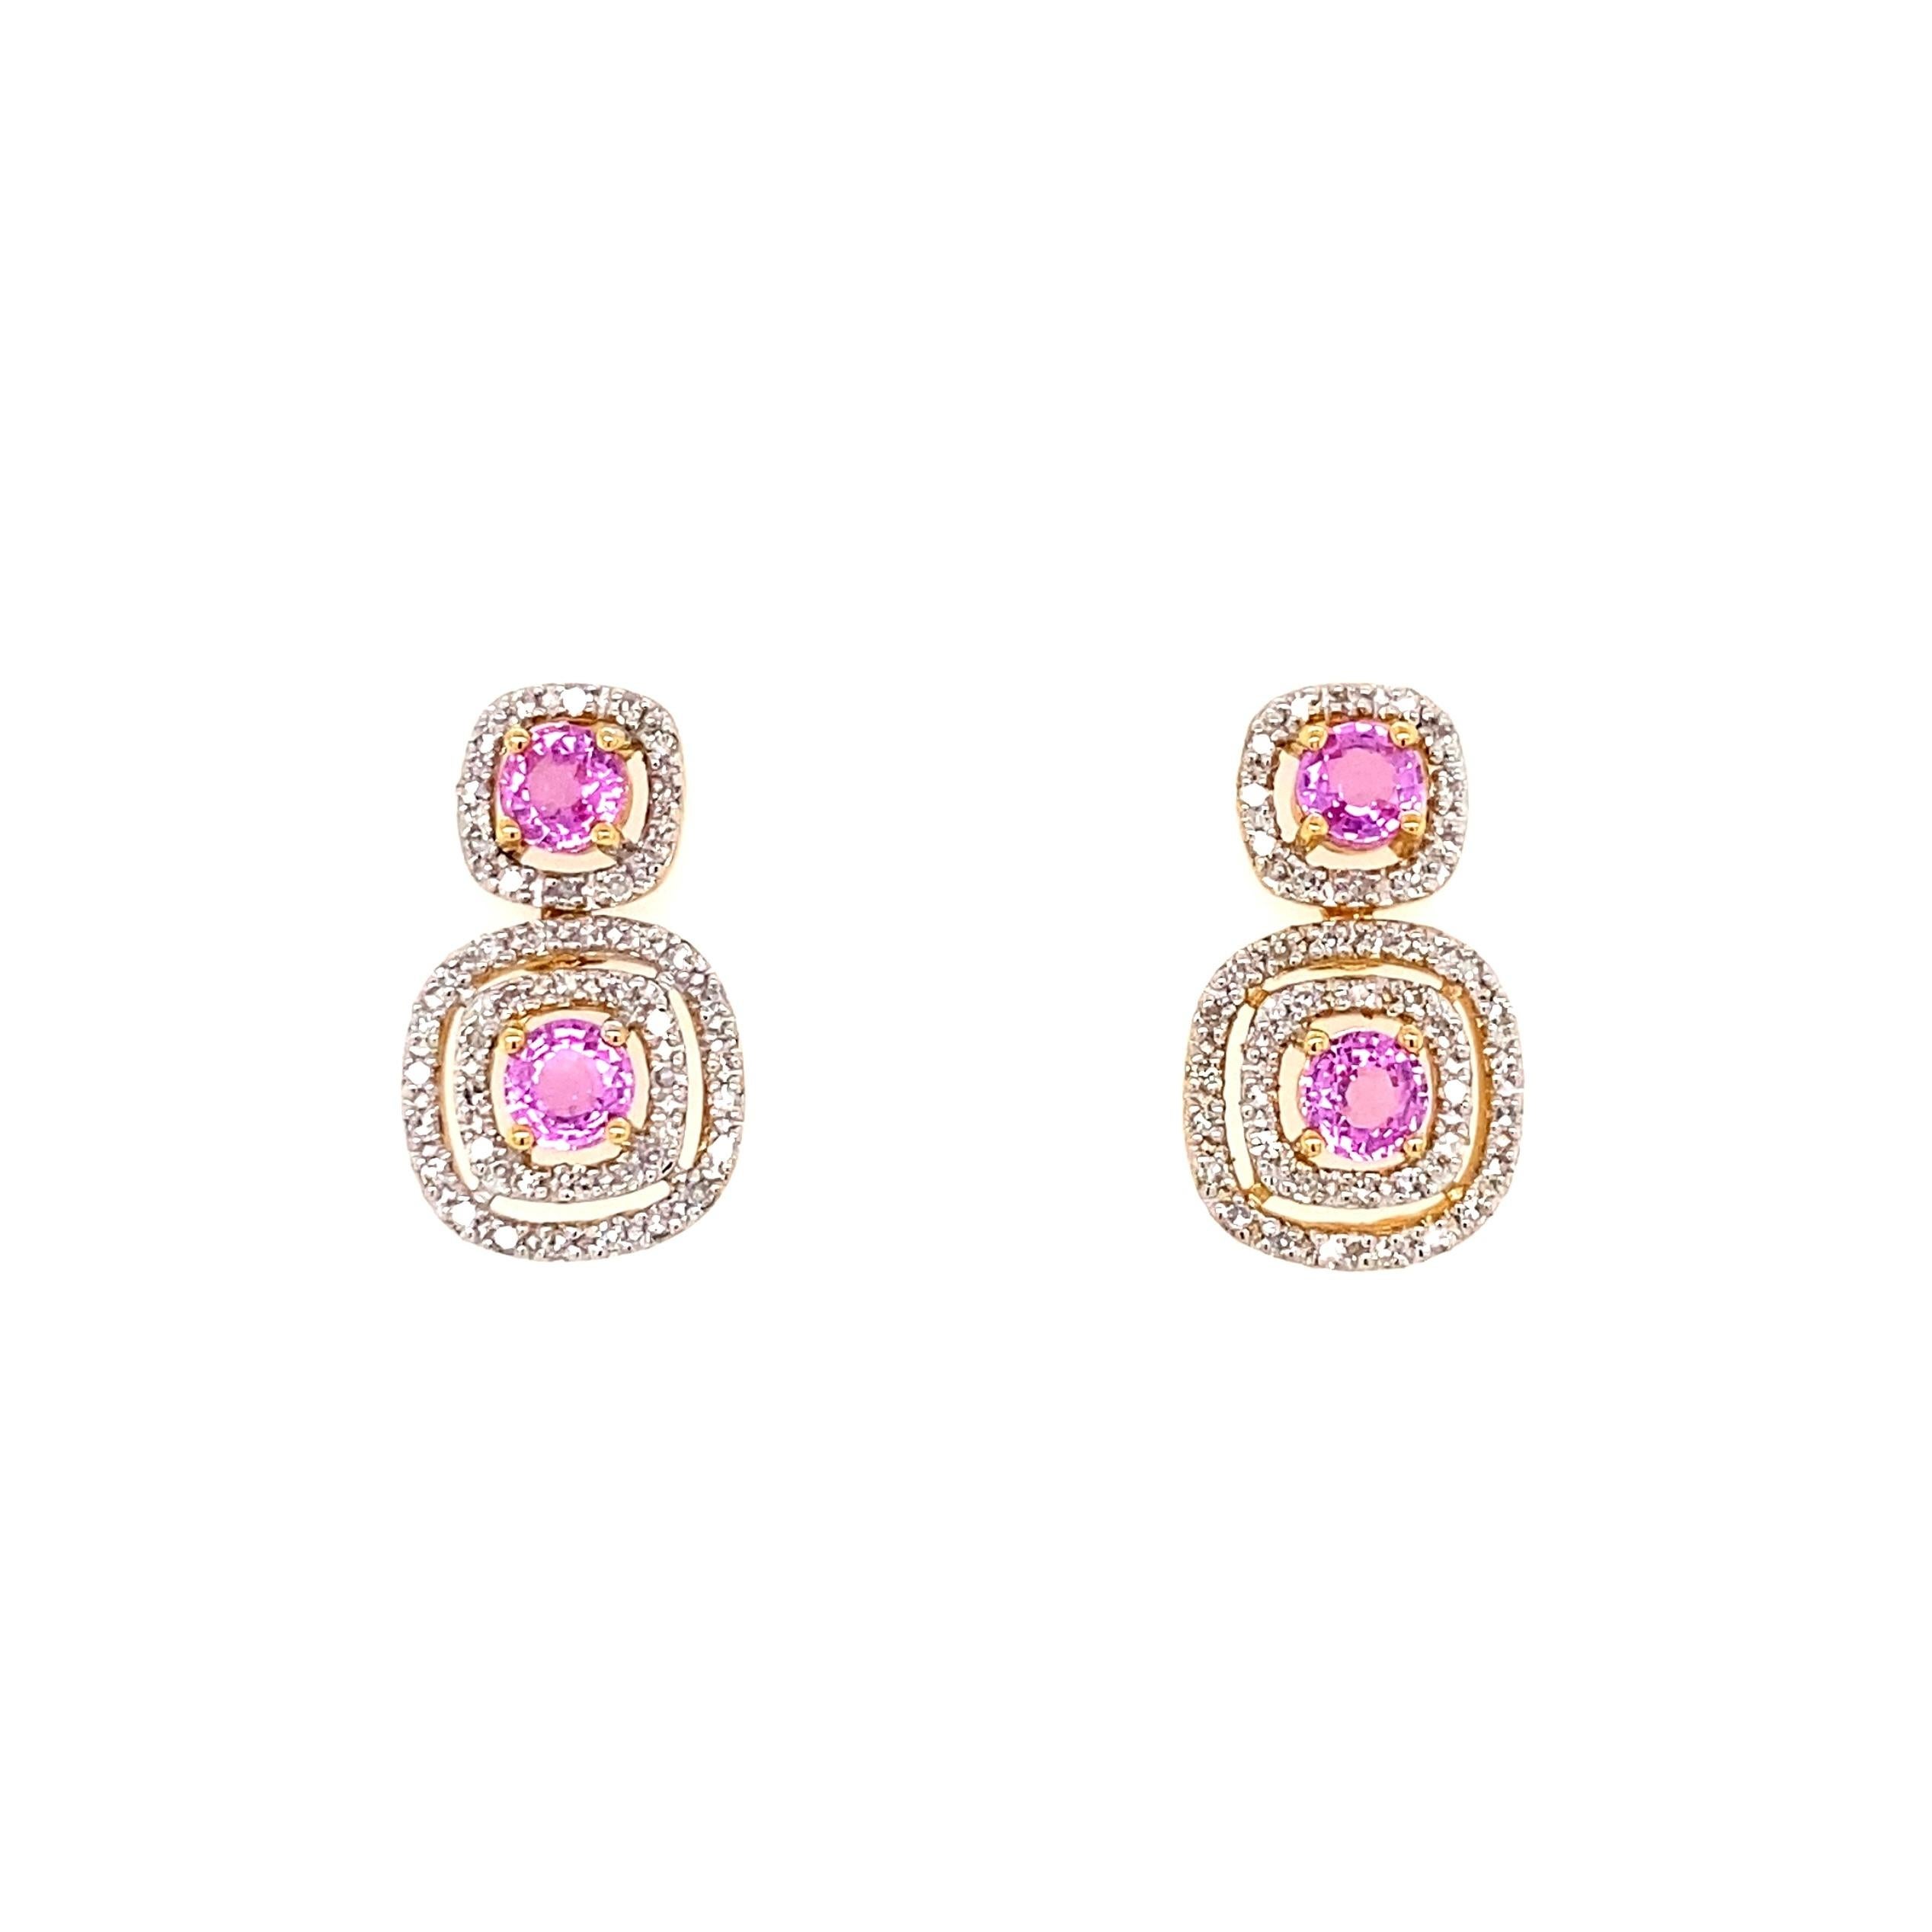 Simply Beautiful! Finely detailed Double Drop Gold Halo Earrings. Each Earring centering a securely Hand set Pink Sapphire, weighing approx. 1.15tcw. Surrounded with Diamonds weighing approx. 0.35tcw. Measuring approx. 0.76